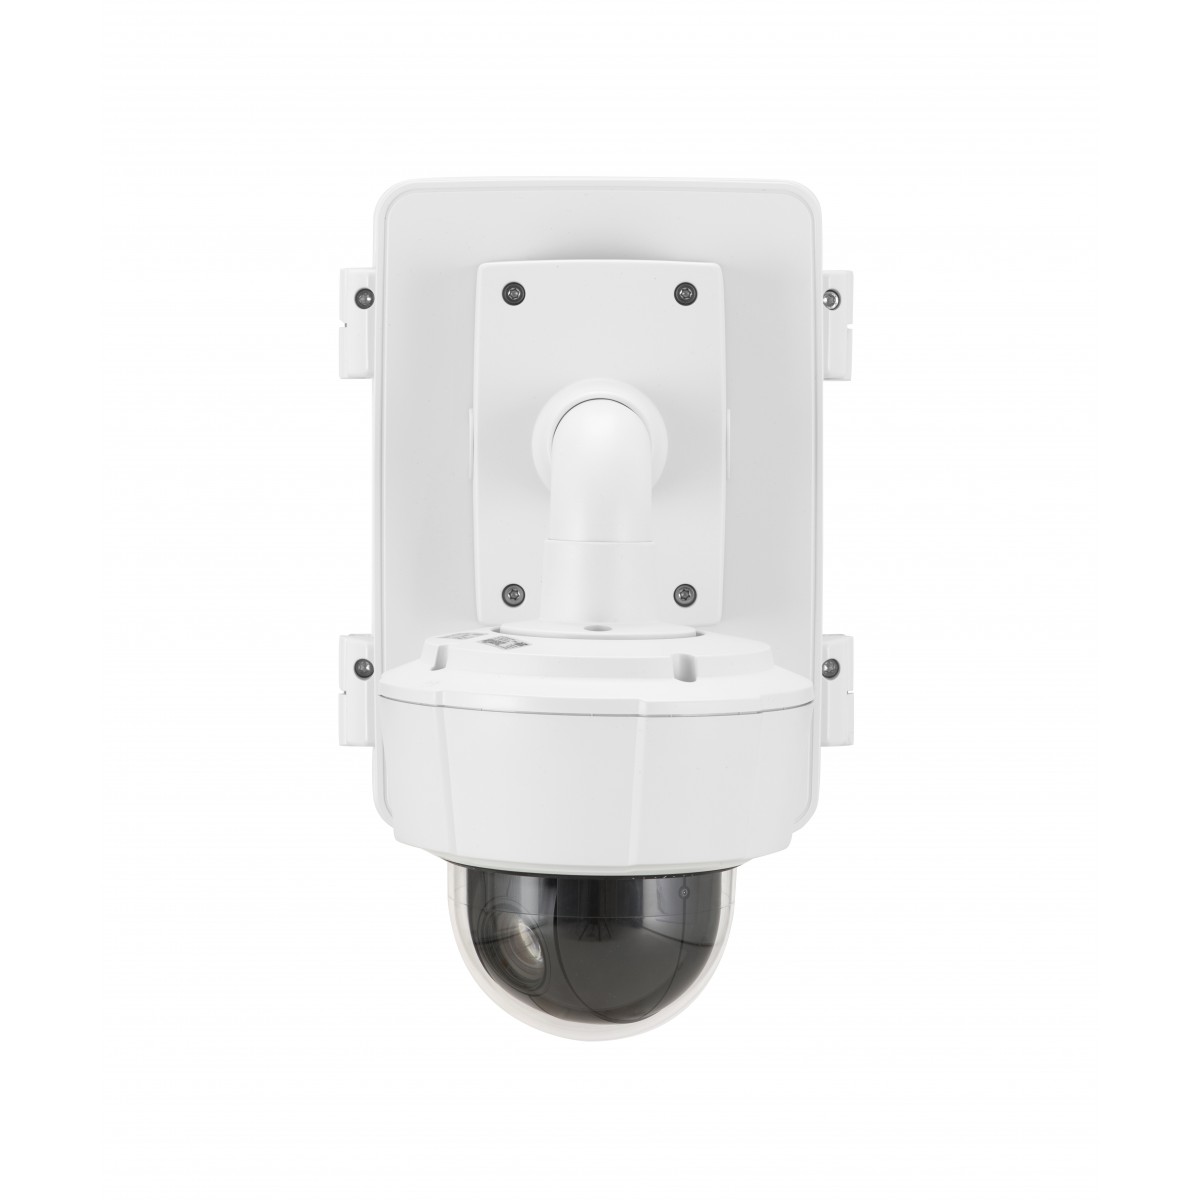 Axis T98A18-VE - Housing  mount - Outdoor - Stainless steel - White - Stainless steel - IEC 60529 IP66 - NEMA 250 rating Type 4X